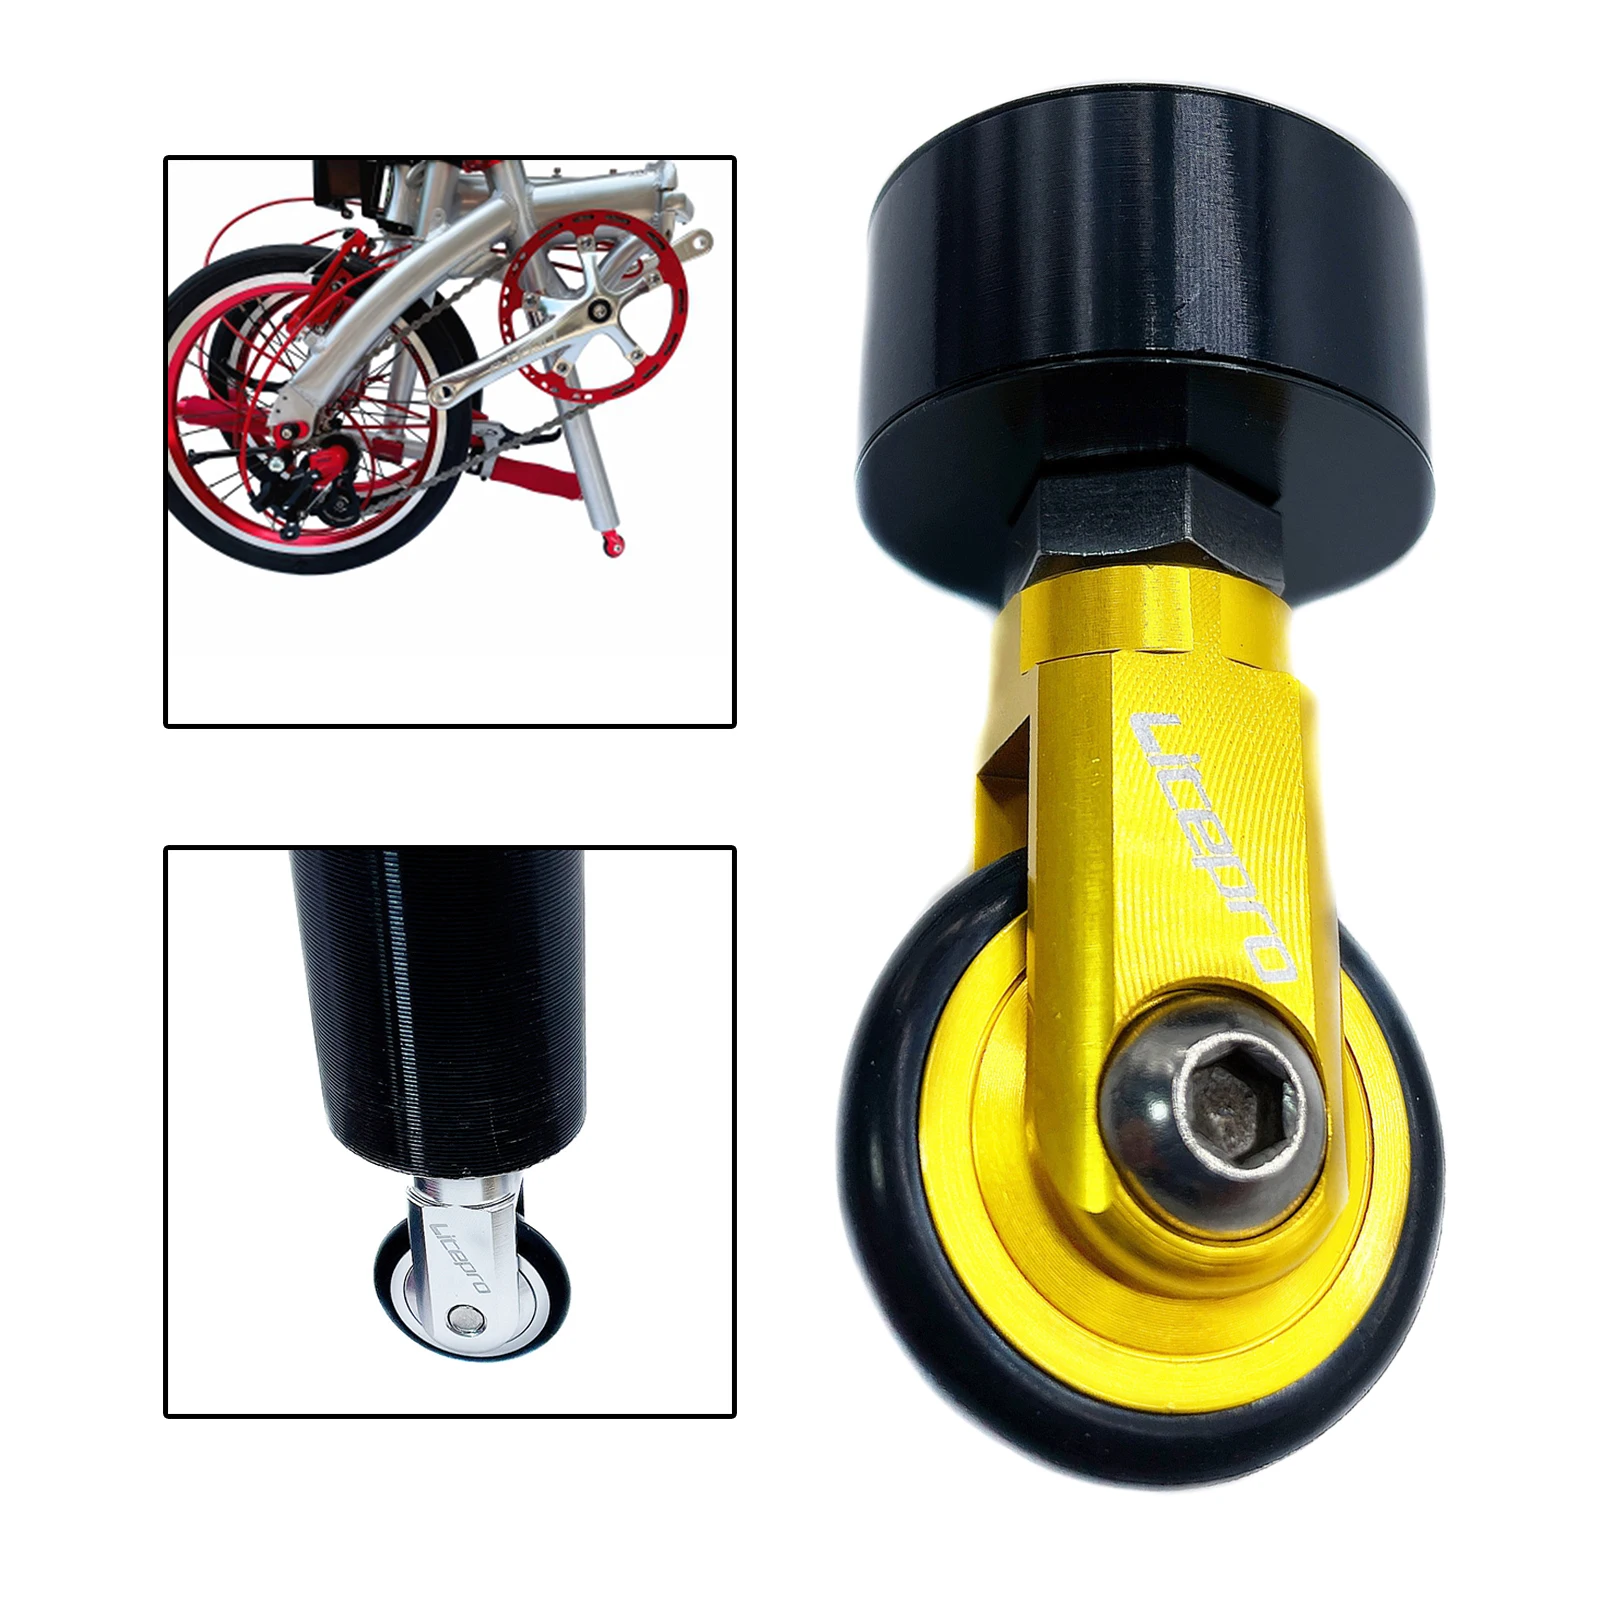 Folding Bike Easy Wheel Roller 33.9mm Seatpost Mounted Folded Up Bicycle Pushing Easywheel Waking Caster Accessories